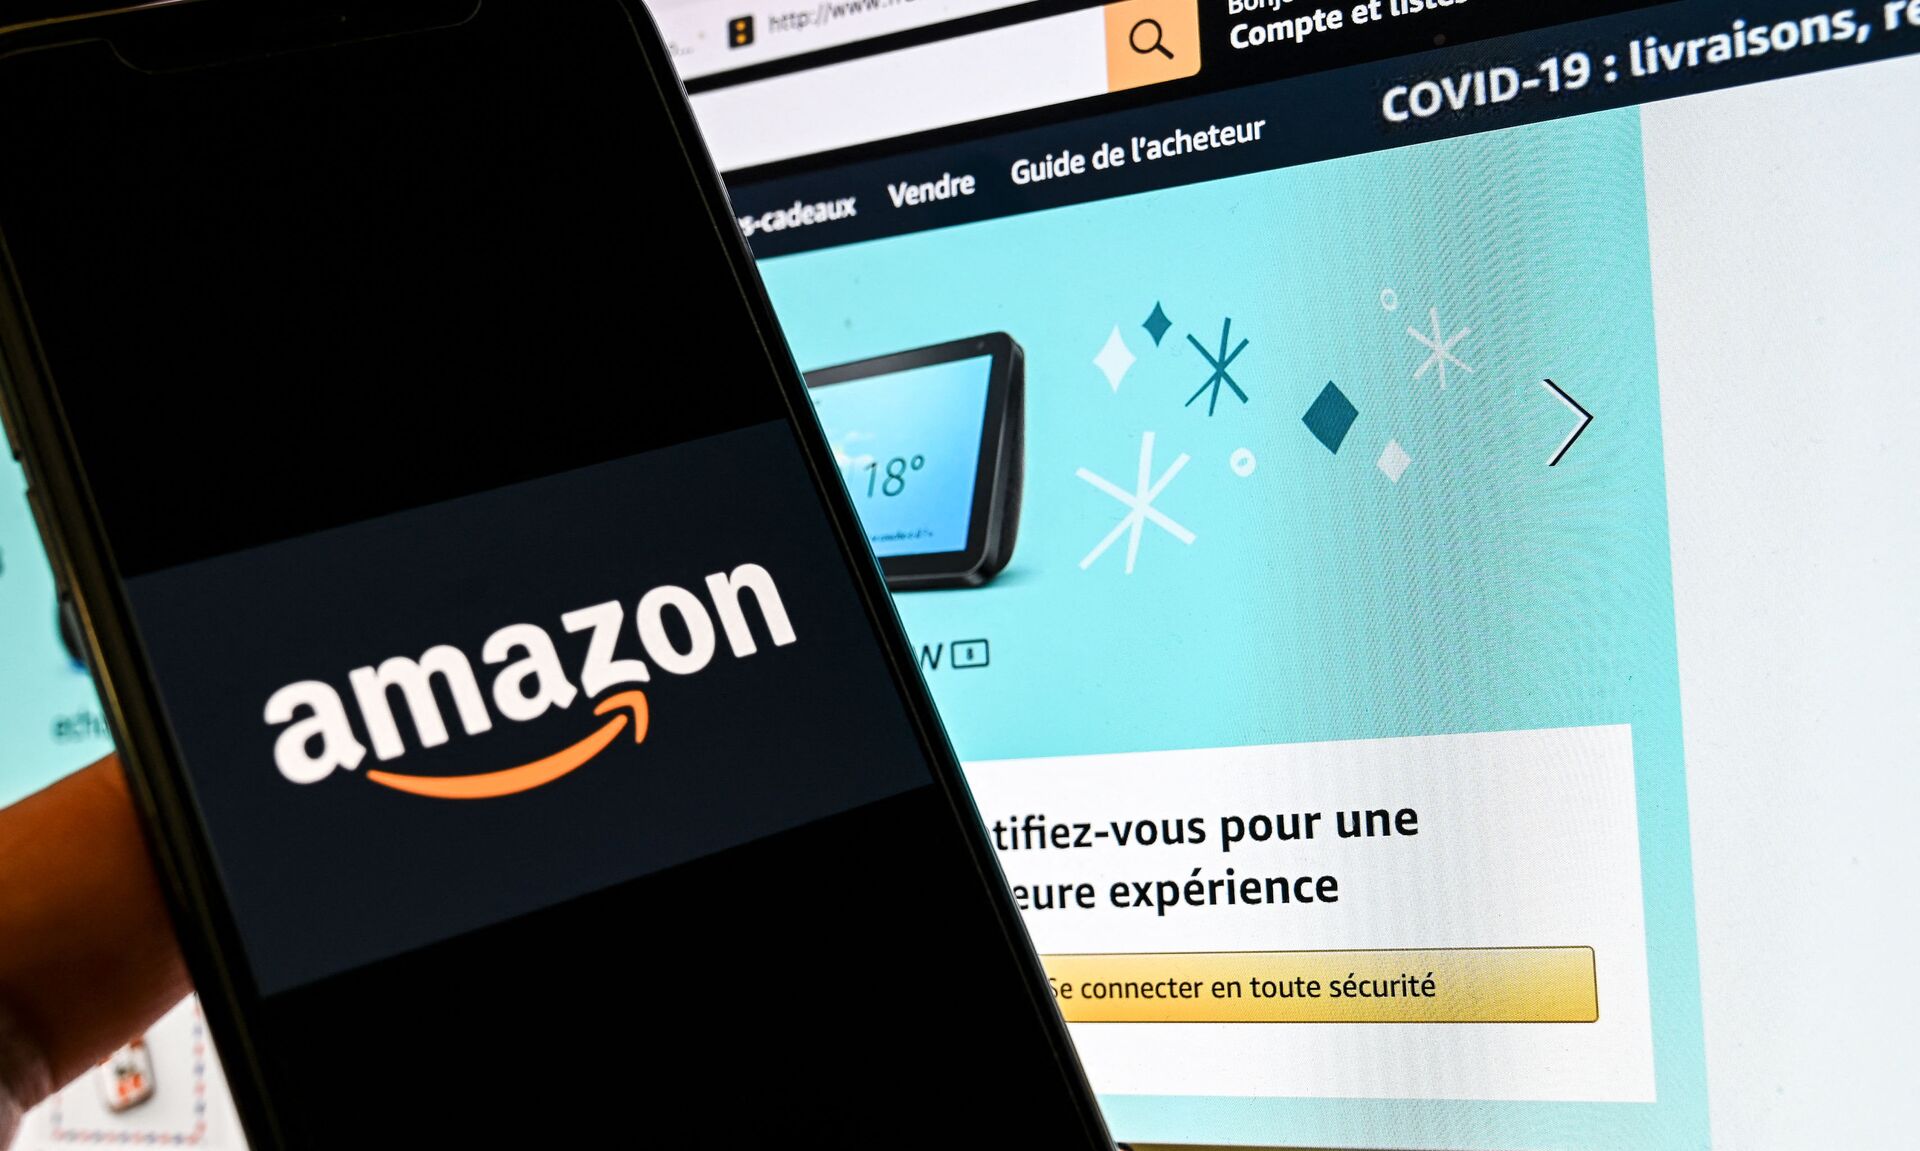 In this photograph taken on November 18, 2020 in Lille, a person poses with a smartphone showing an Amazon logo, in front of a computer screen displaying the home page of Amazon France sales website. - Sputnik International, 1920, 21.09.2021